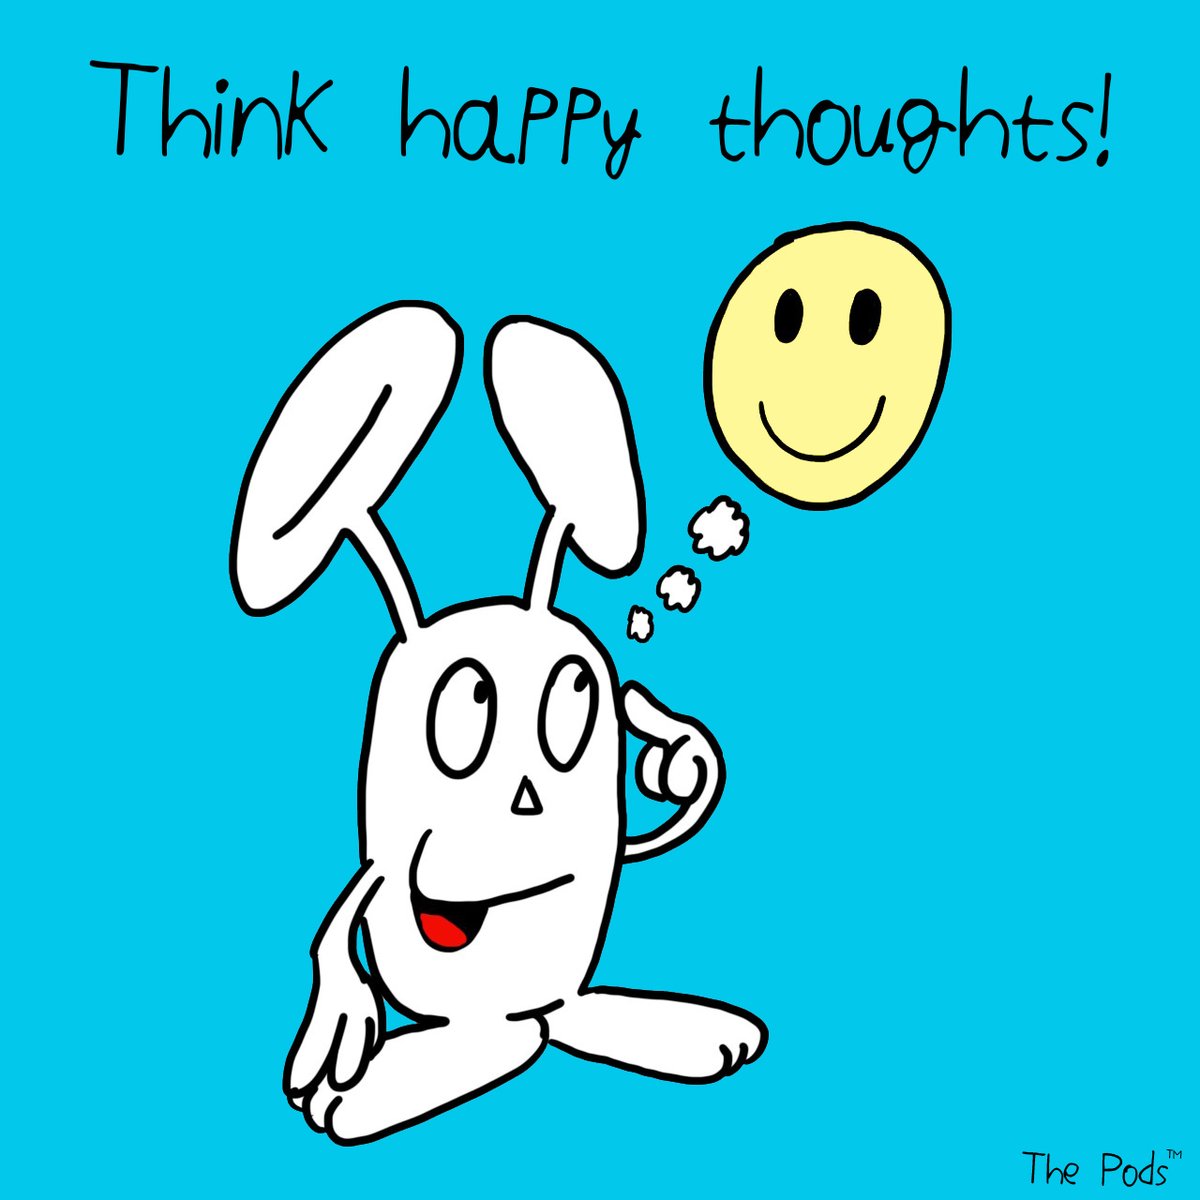 Have a great week! 
#monday 
#mondayfeeljng #happymonday #meetthepods 
#bunnypod #thepods #happythoughts #happy 
#thoughts #think #thinking #quoteoftheday #behappy